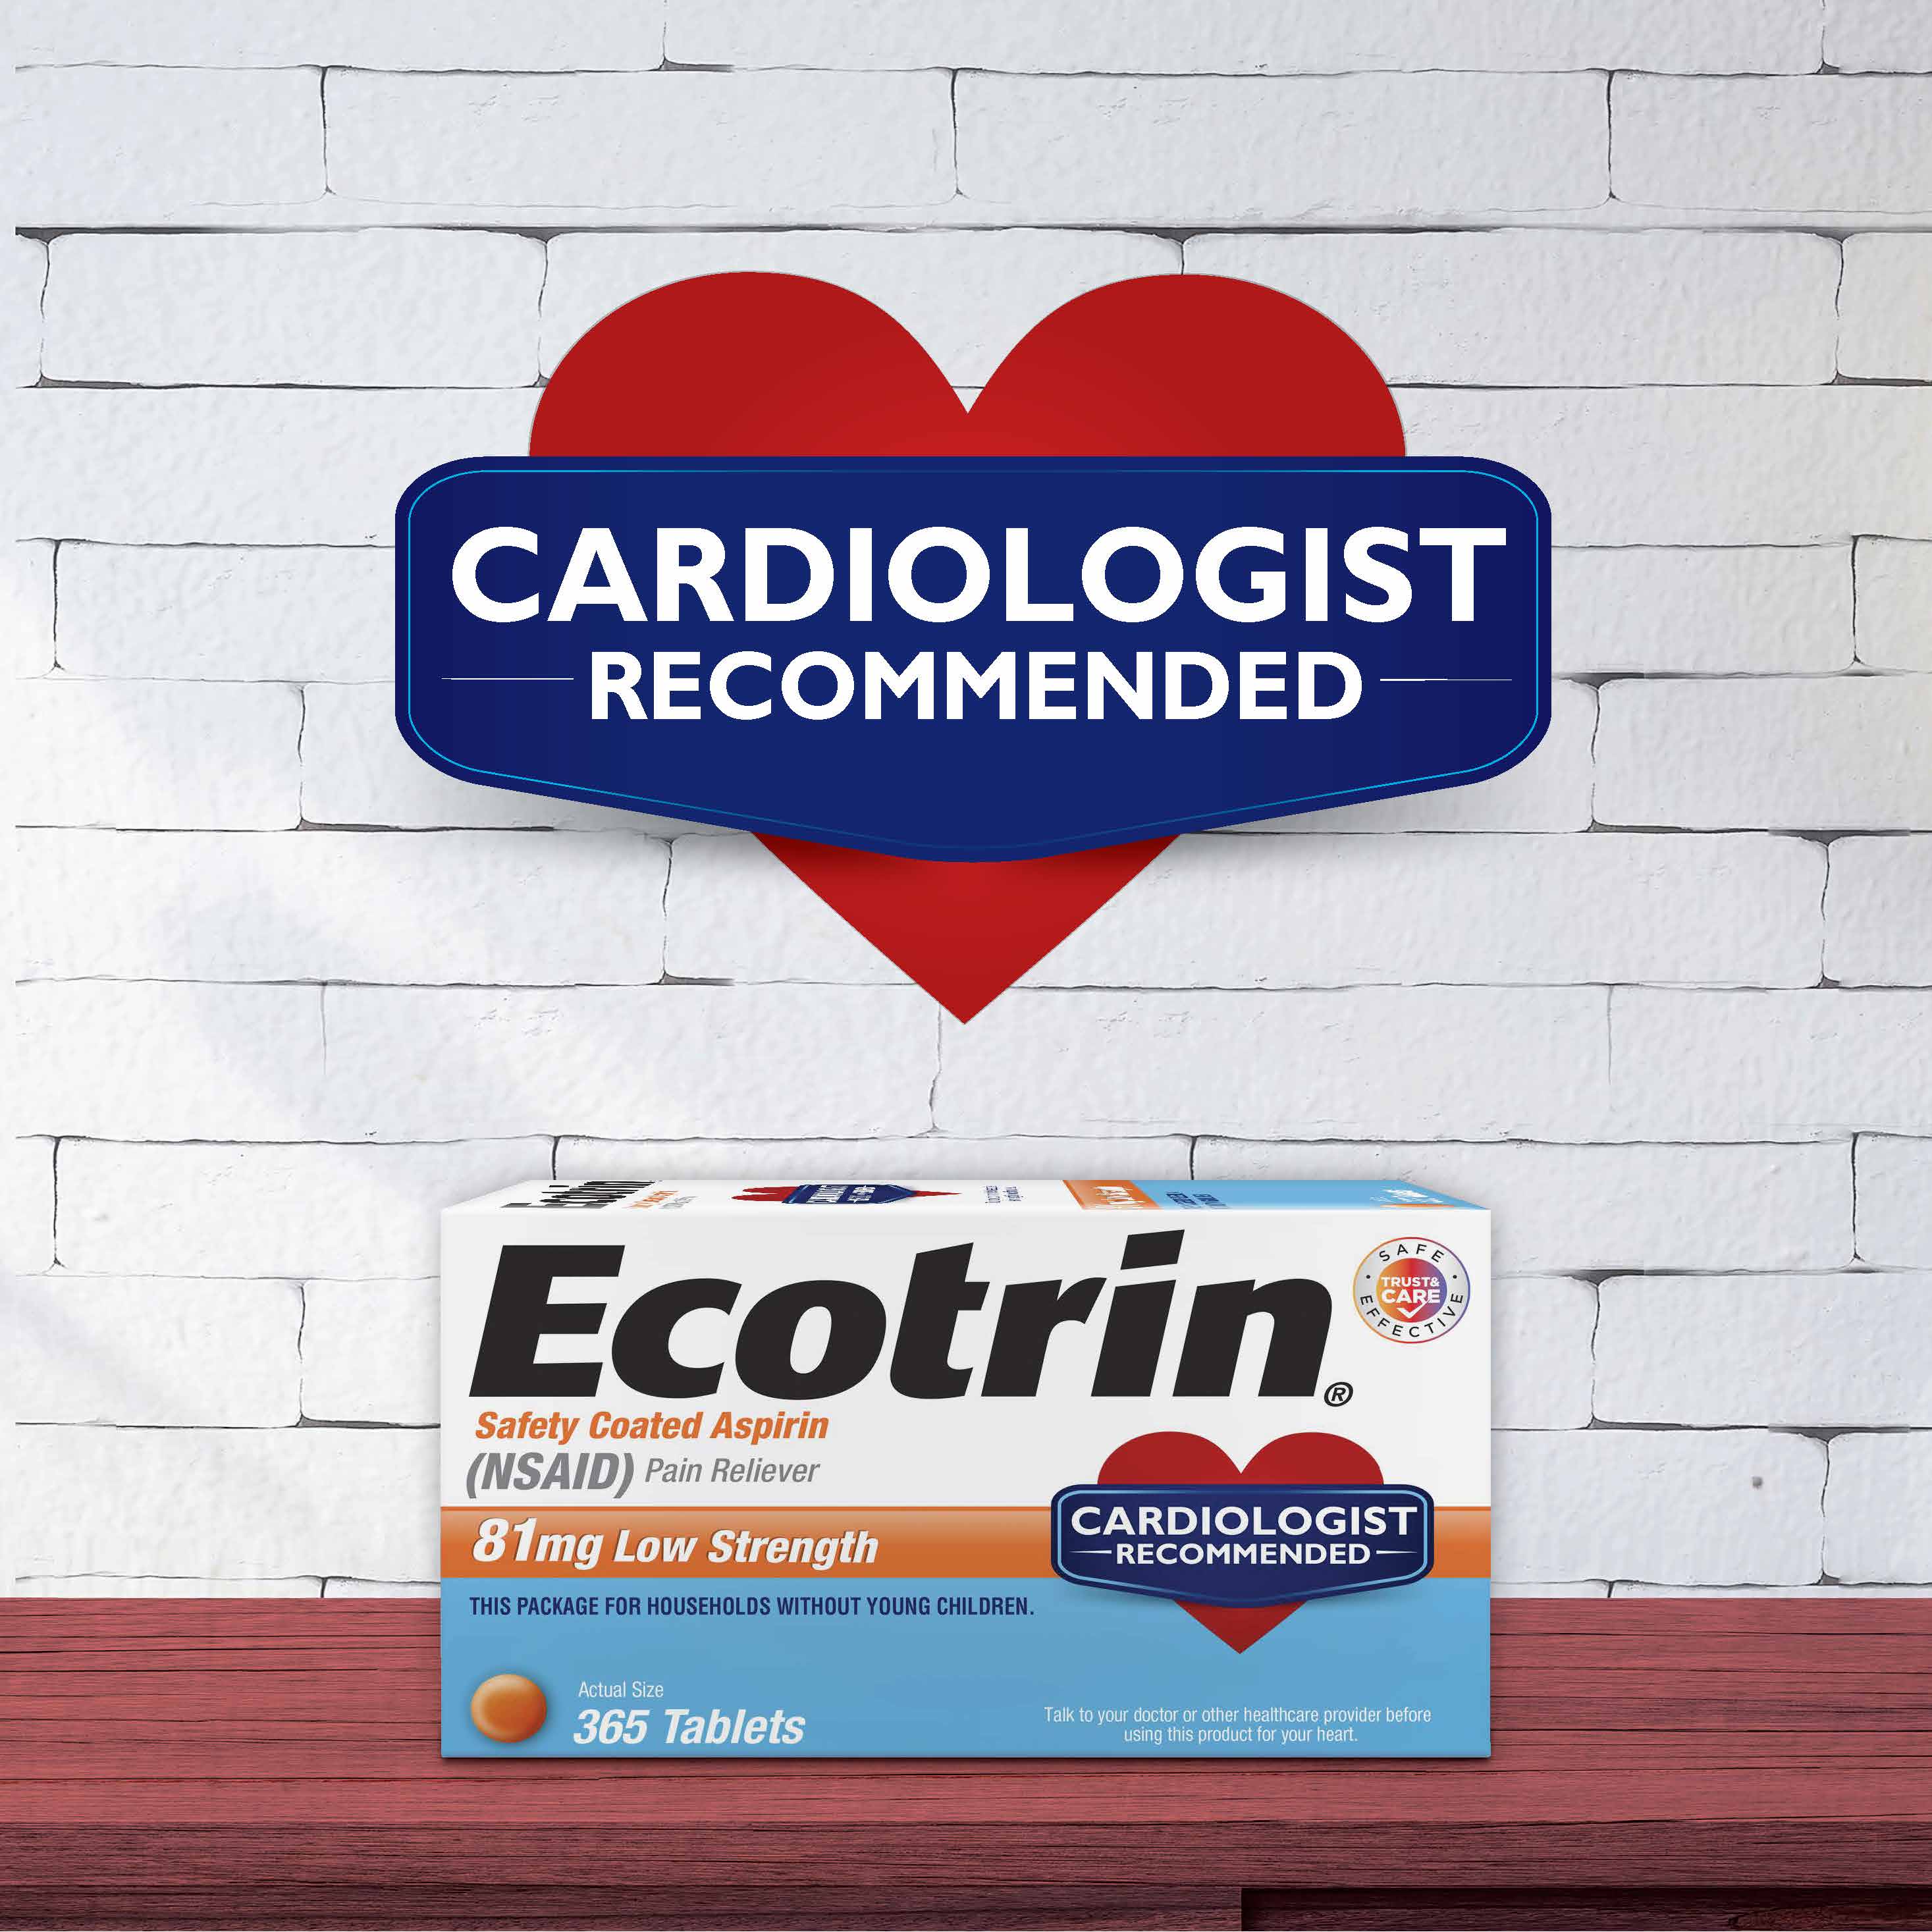 Ecotrin Low Strength Safety Coated Aspirin, NSAID, 81mg, 45 Tablets - image 3 of 4